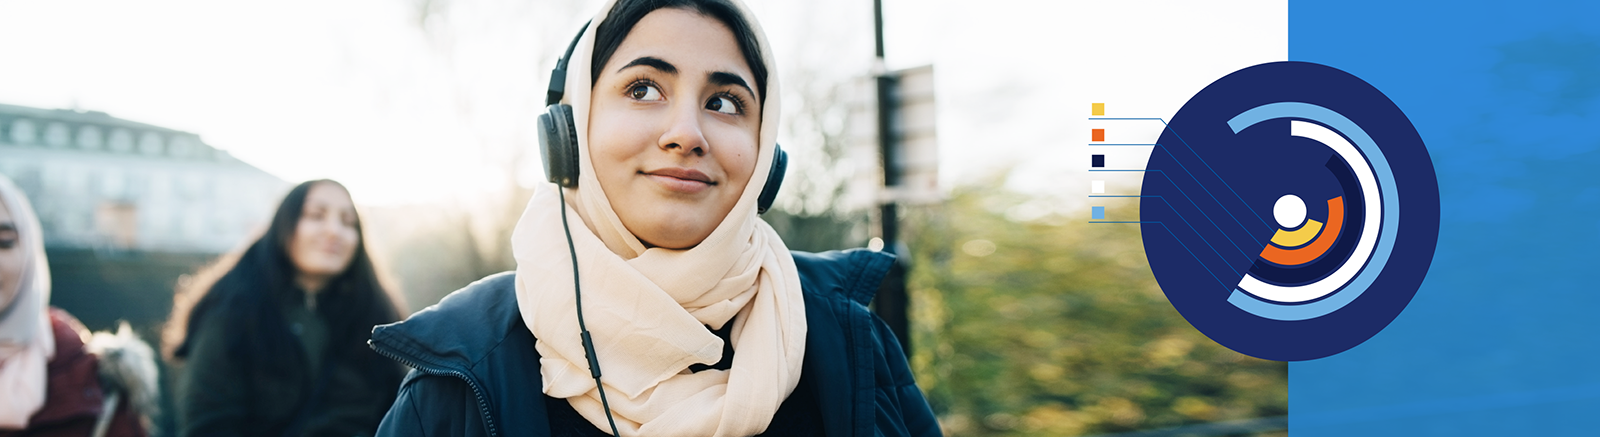 A Middle Eastern woman wearing a head scarf and headphones smiling